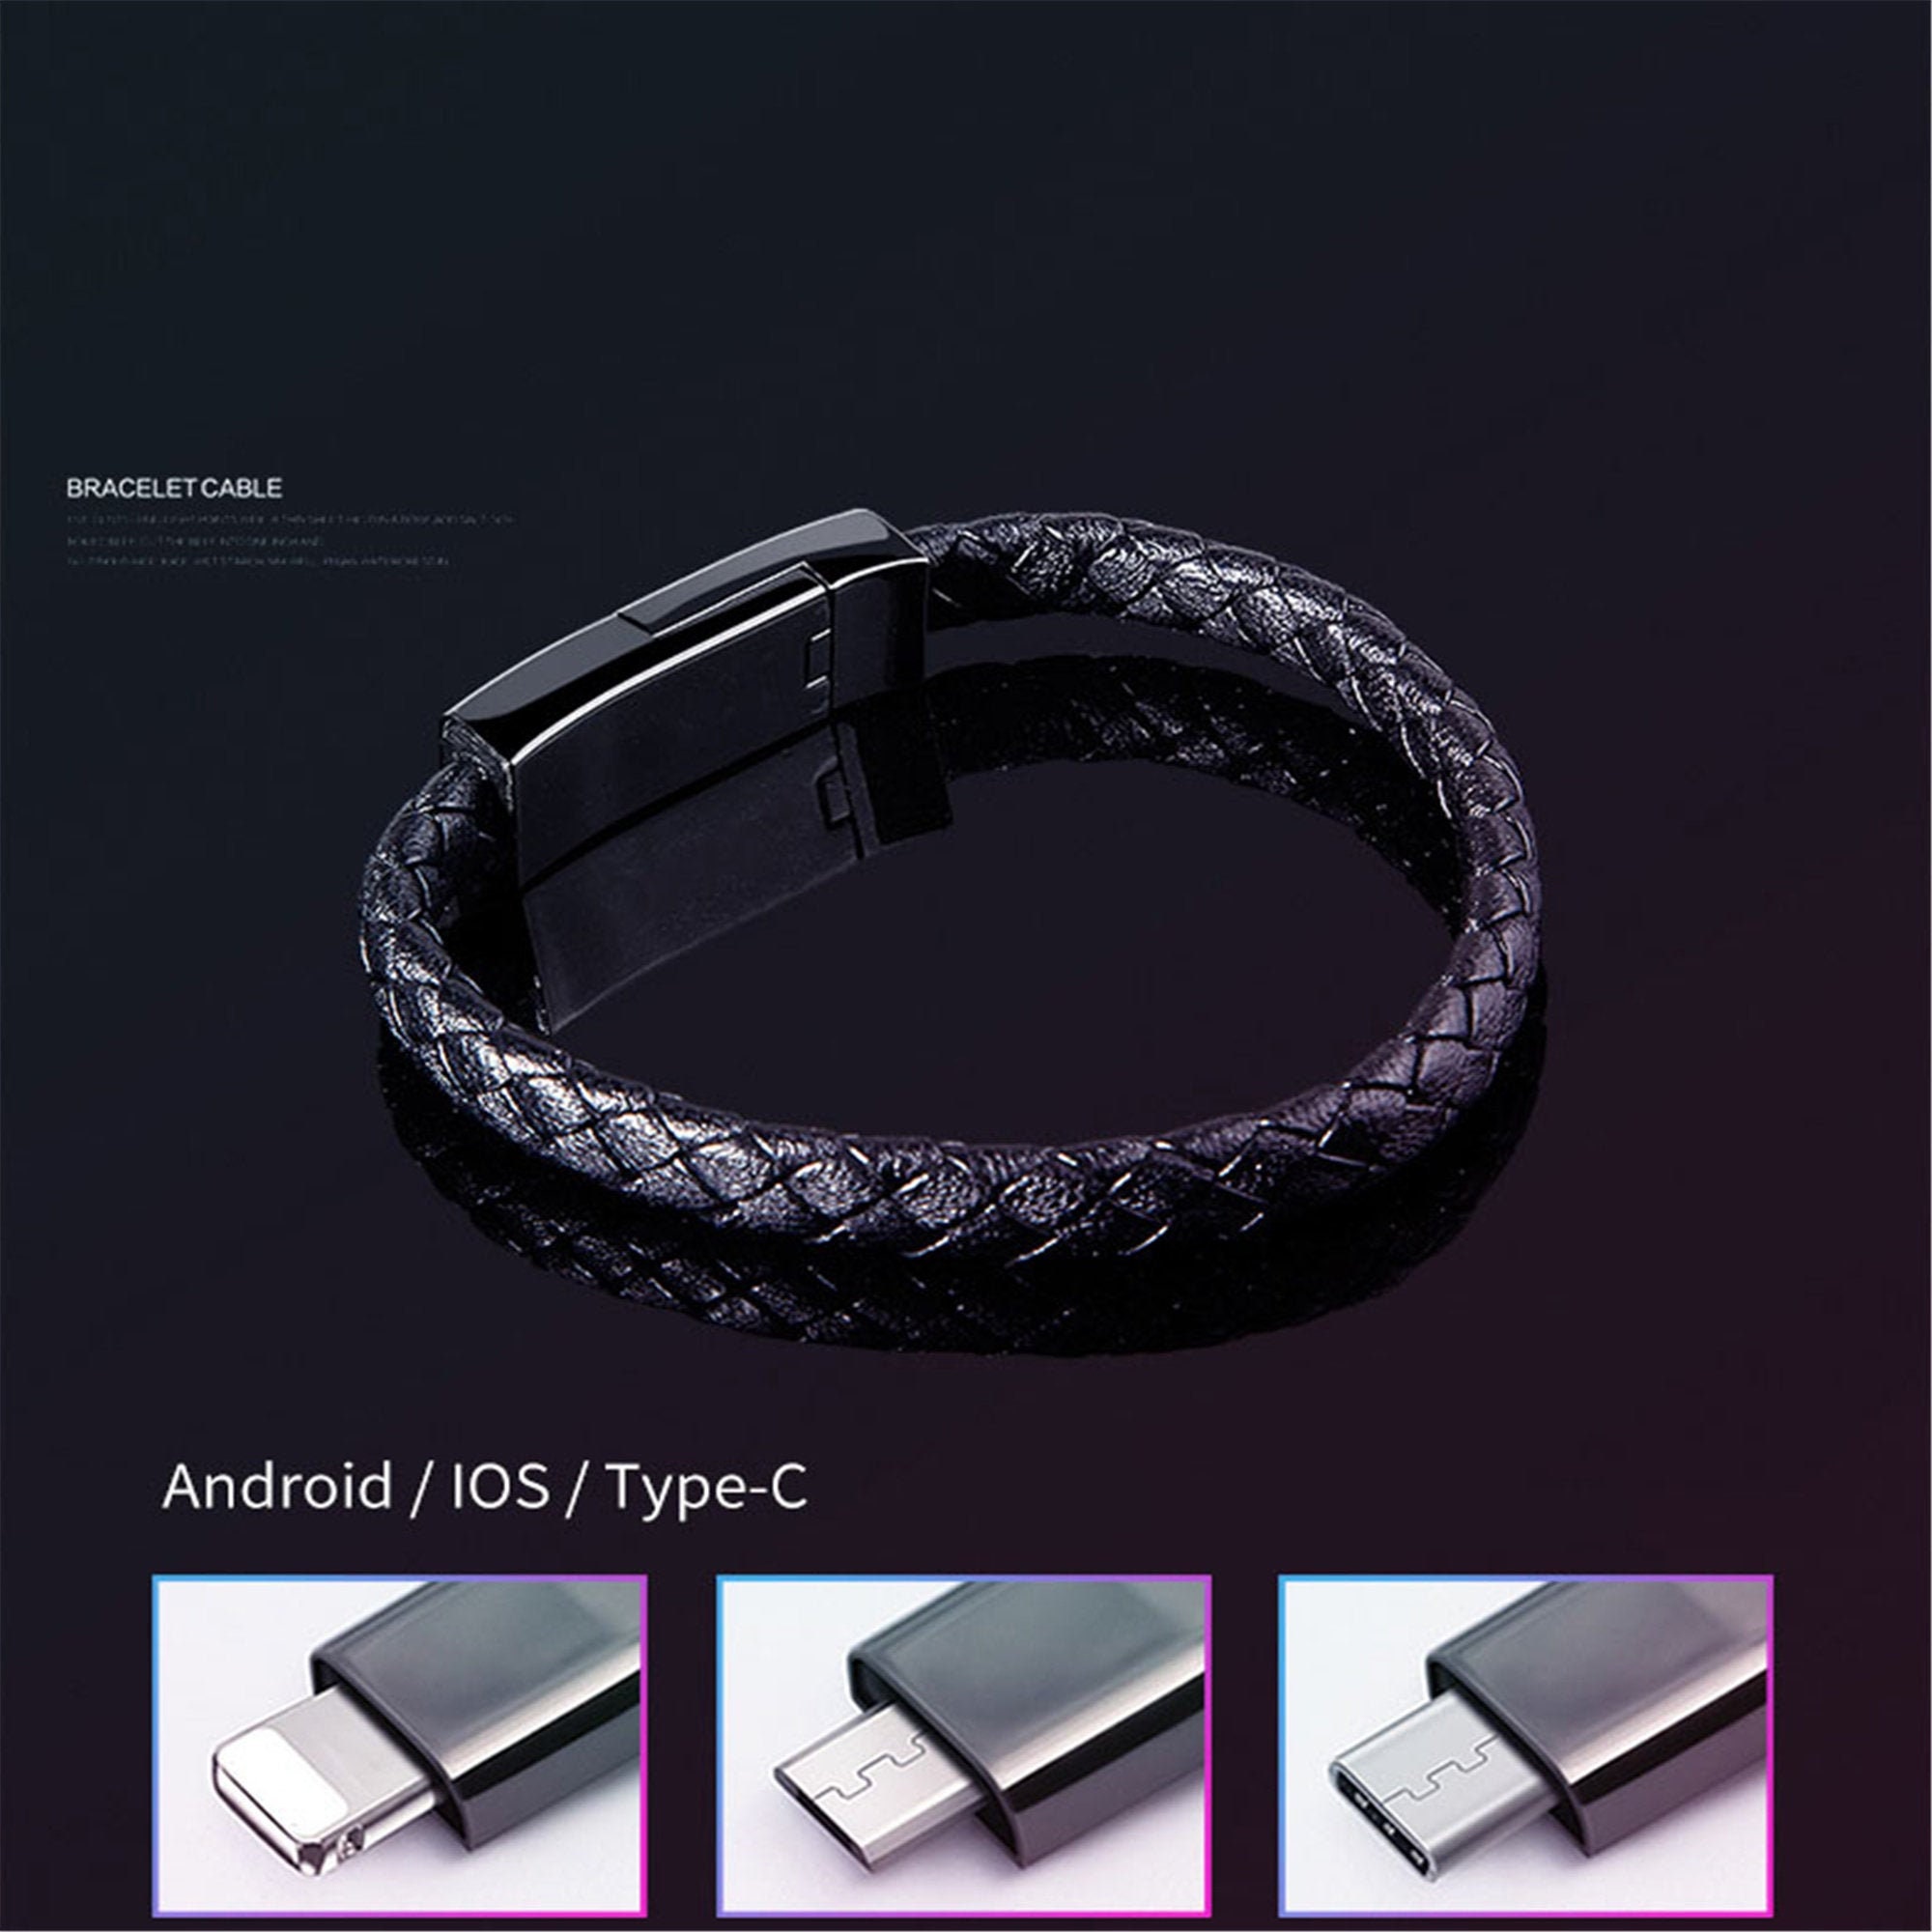 ZXX22 Leather Braided Bracelet Data charger| Alibaba.com